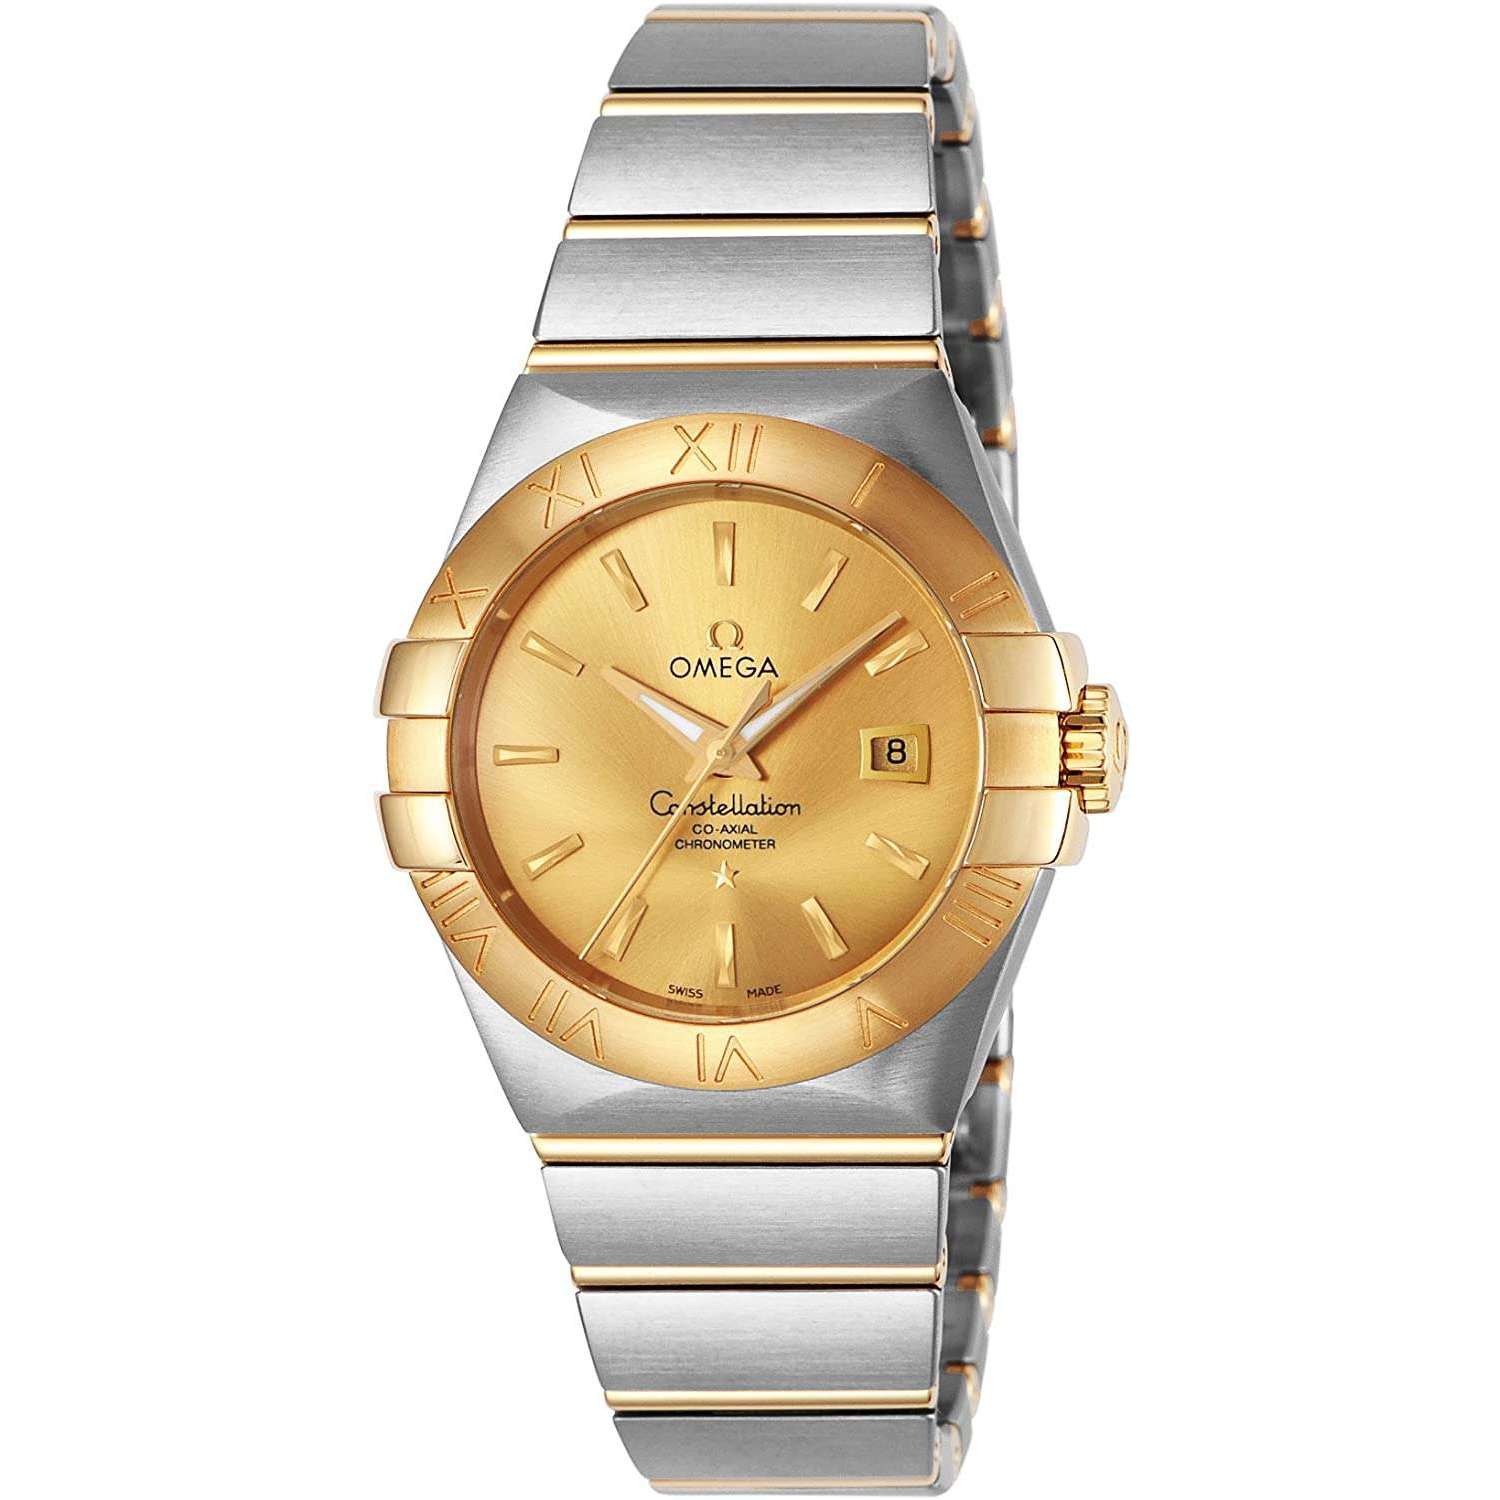 ROOK JAPAN:OMEGA CONSTELLATION CO‑AXIAL CHRONOMETER 31 MM MEN WATCH 123.20.31.20.08.001,Luxury Watch,Omega